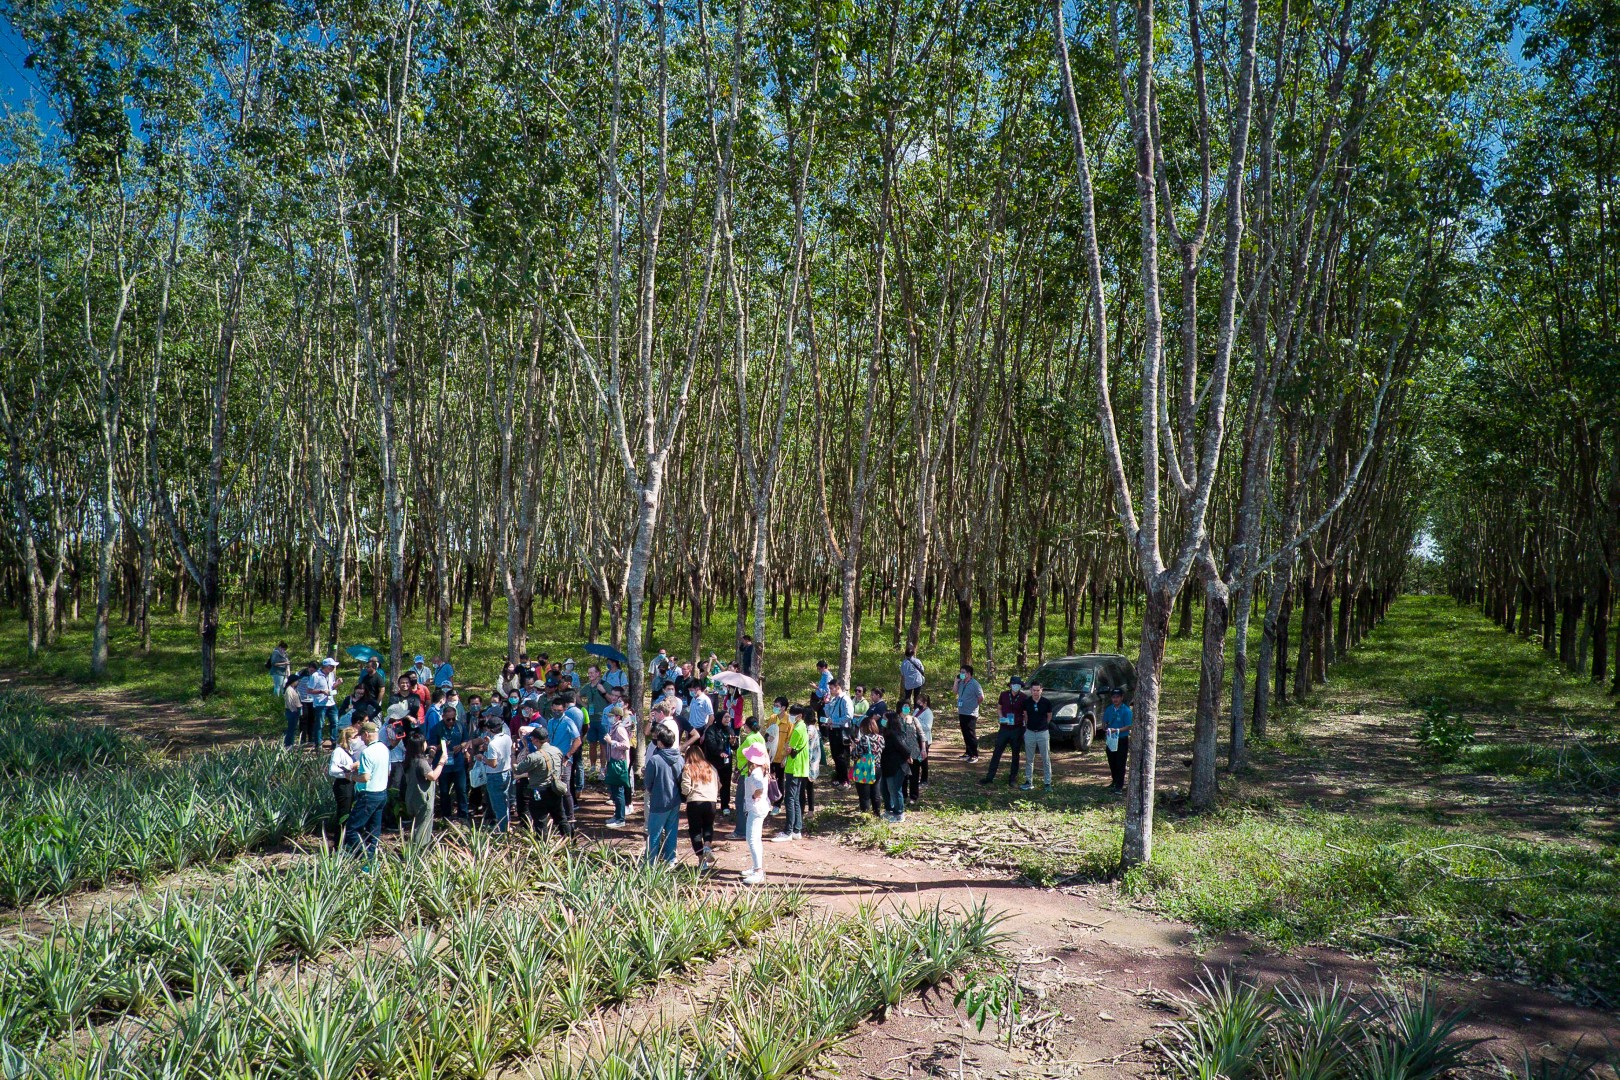 A group of people standing in a forest